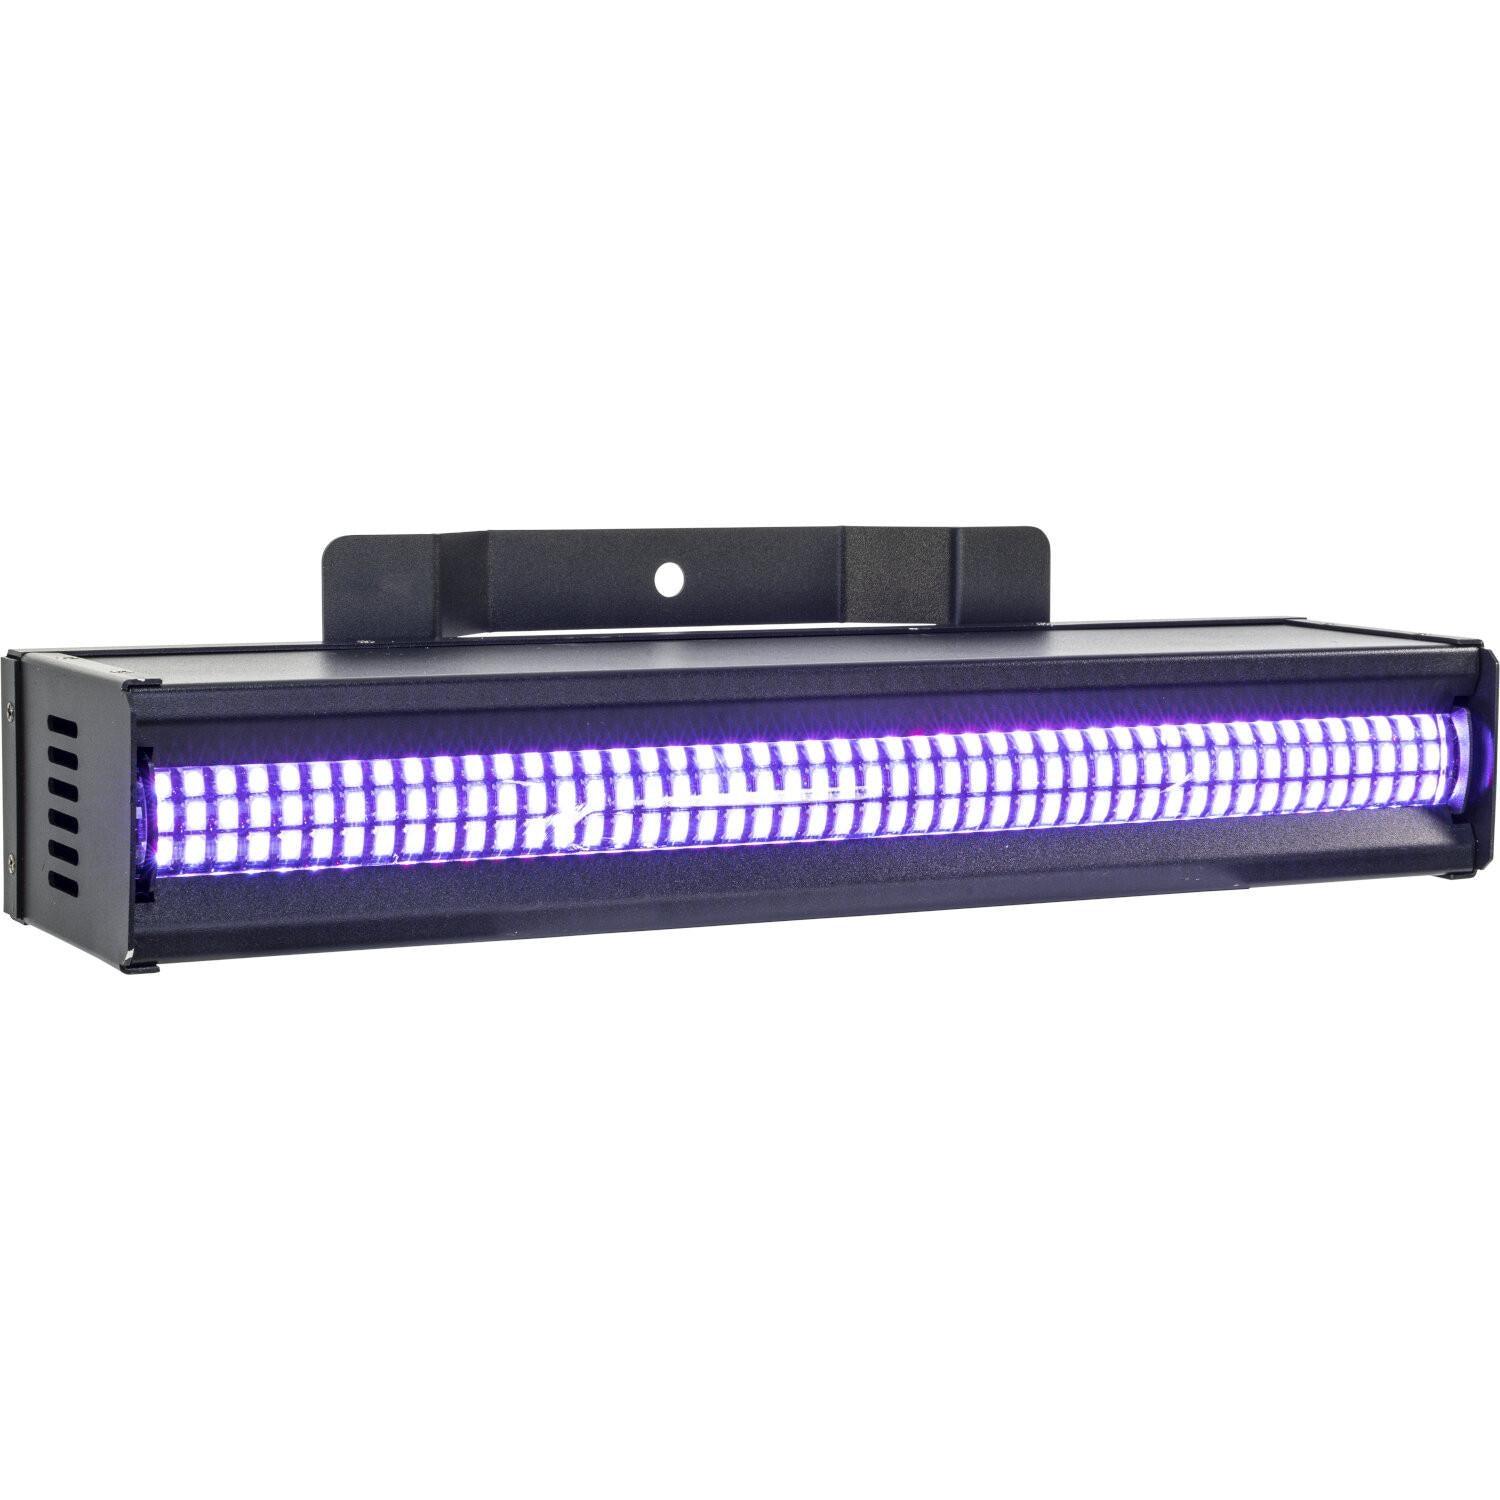 AFX K2000FX Pixel Light Bar with 144 3-in-1 RGB LEDs Lighting Effect - DY Pro Audio